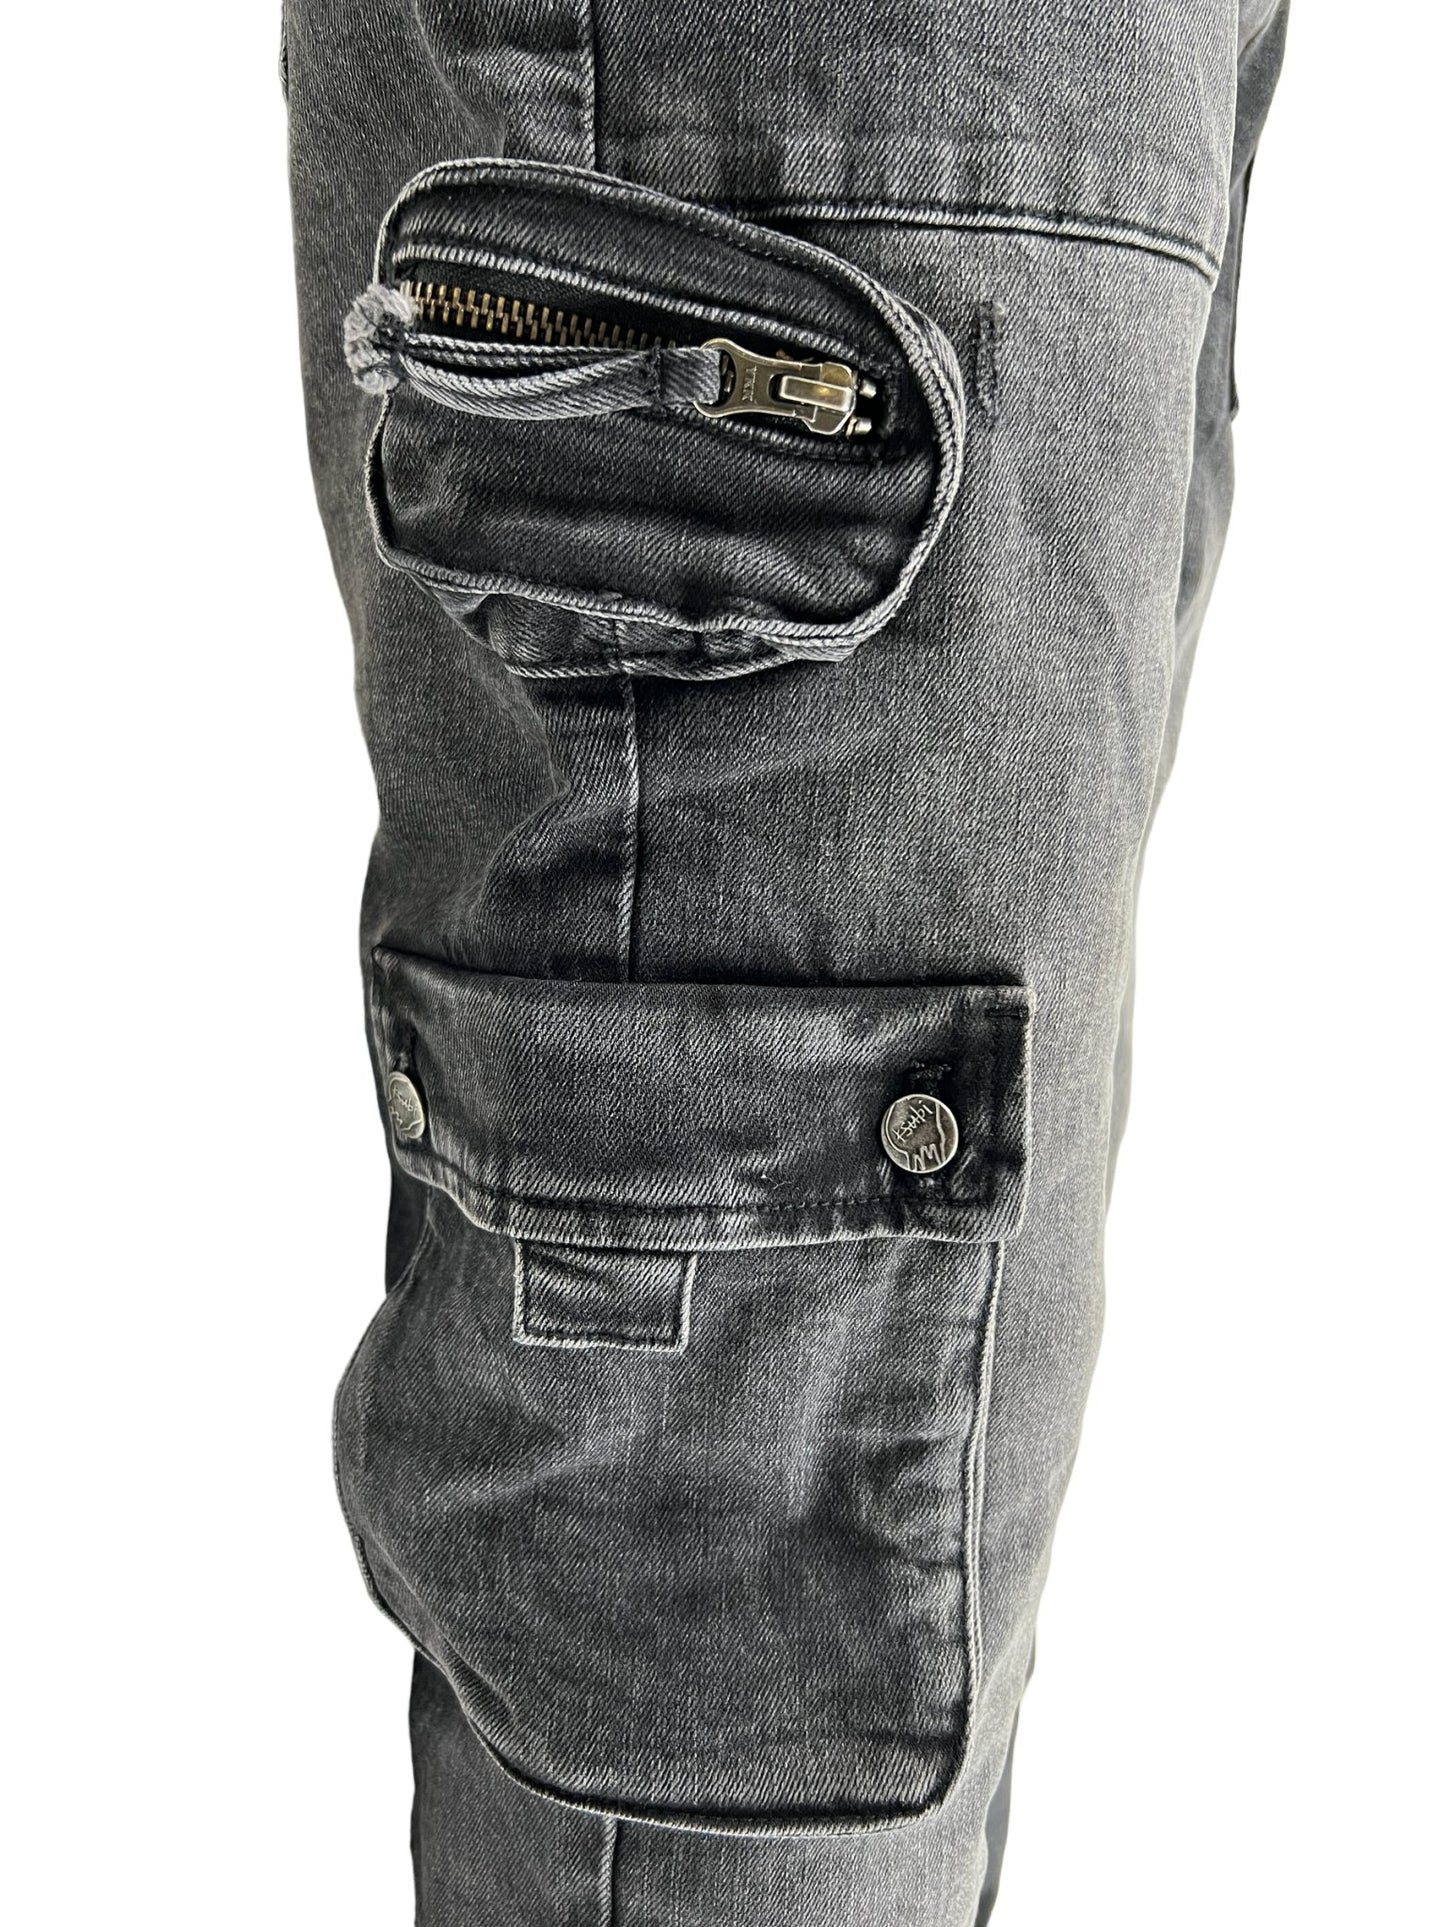 A pair of KSUBI 999 Bronko Cargo Black jeans with a zipper pocket and embroidery branding.